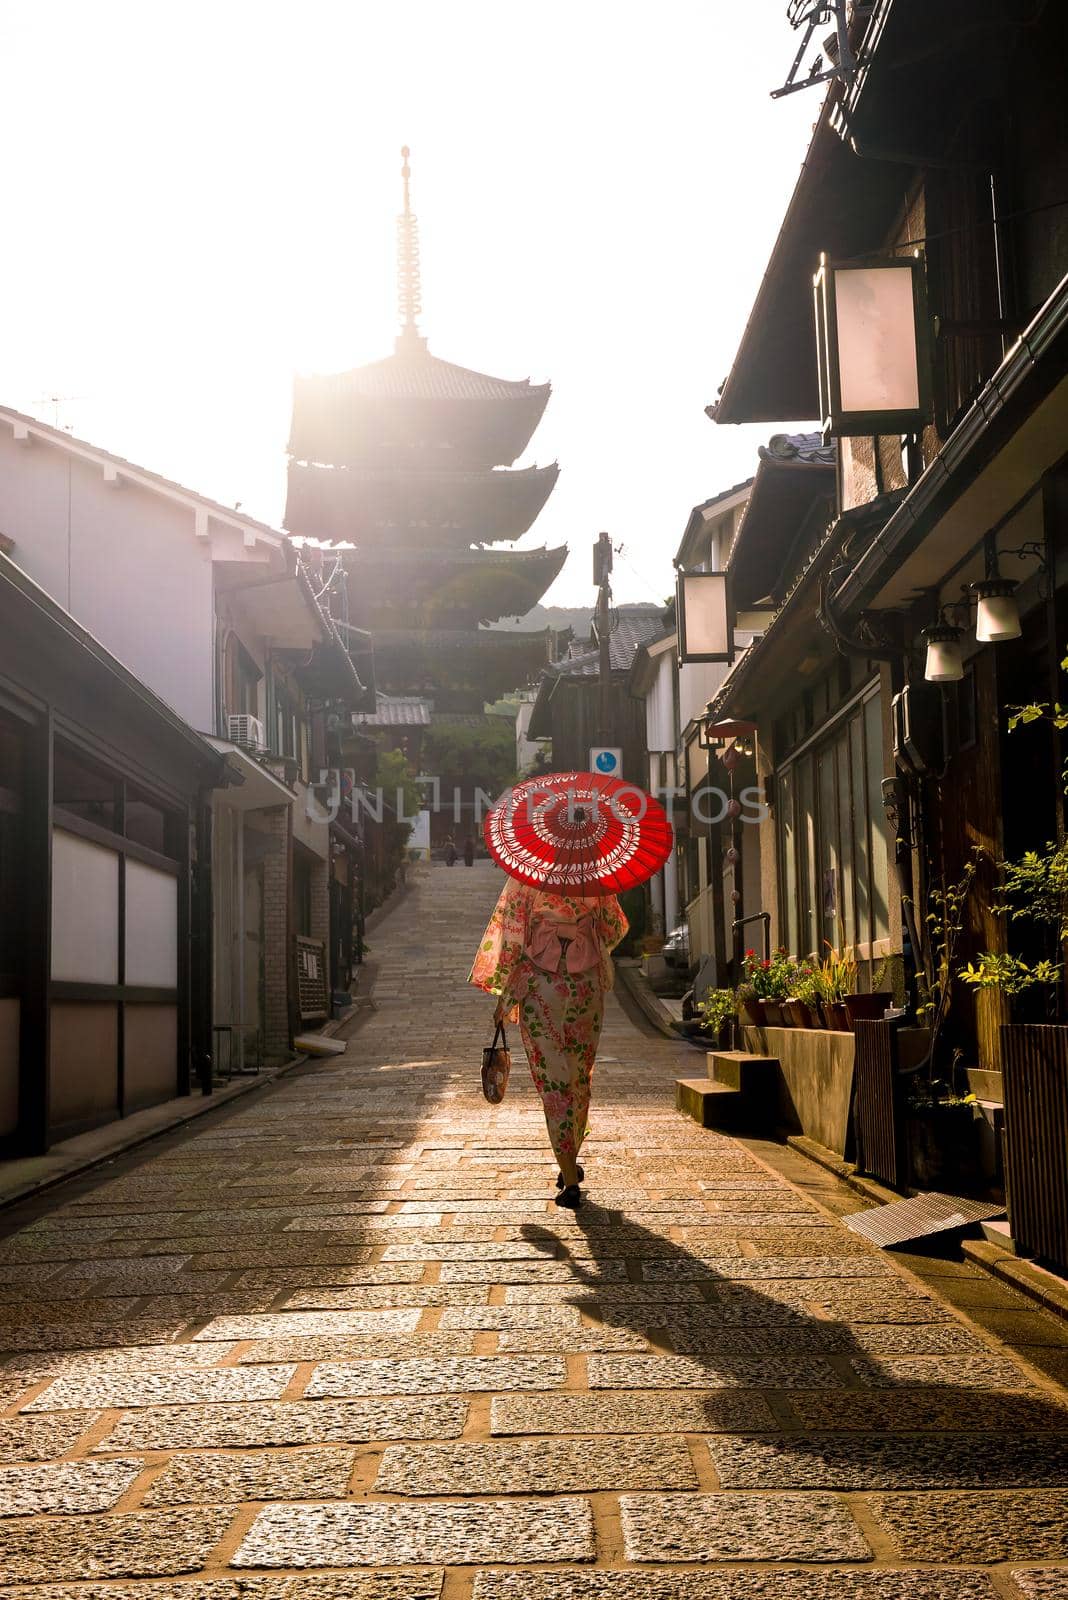 Japanese girl in Yukata with red umbrella in old town  Kyoto by f11photo